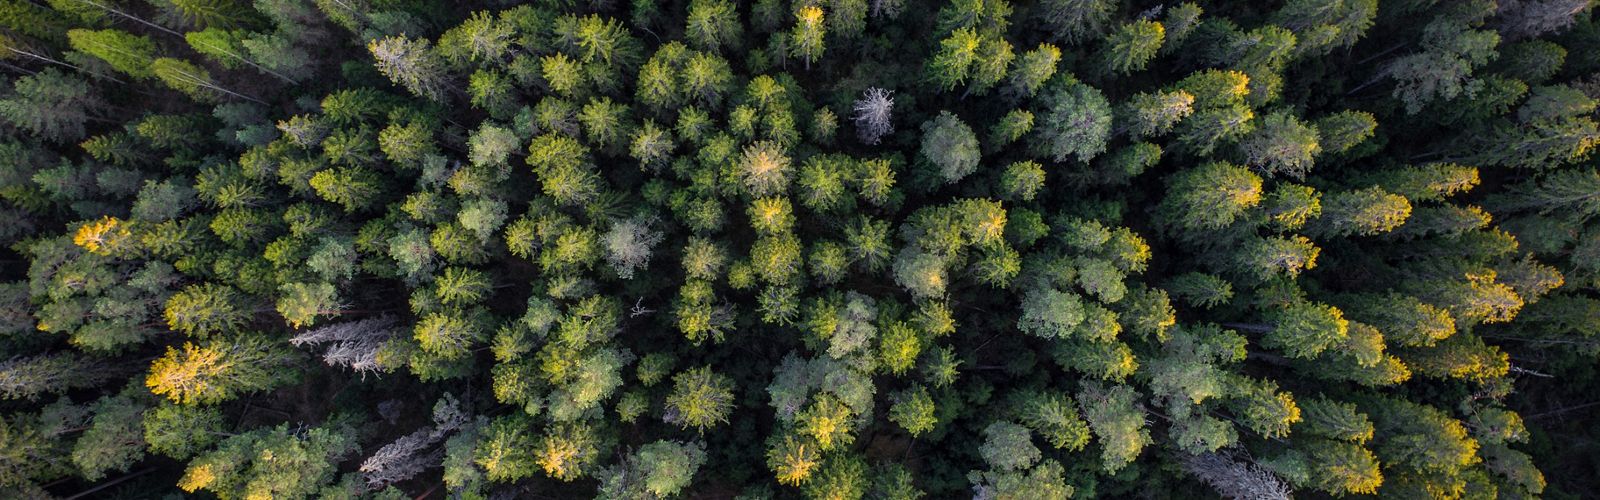 Aerial view of the tops of trees in a dense forest.